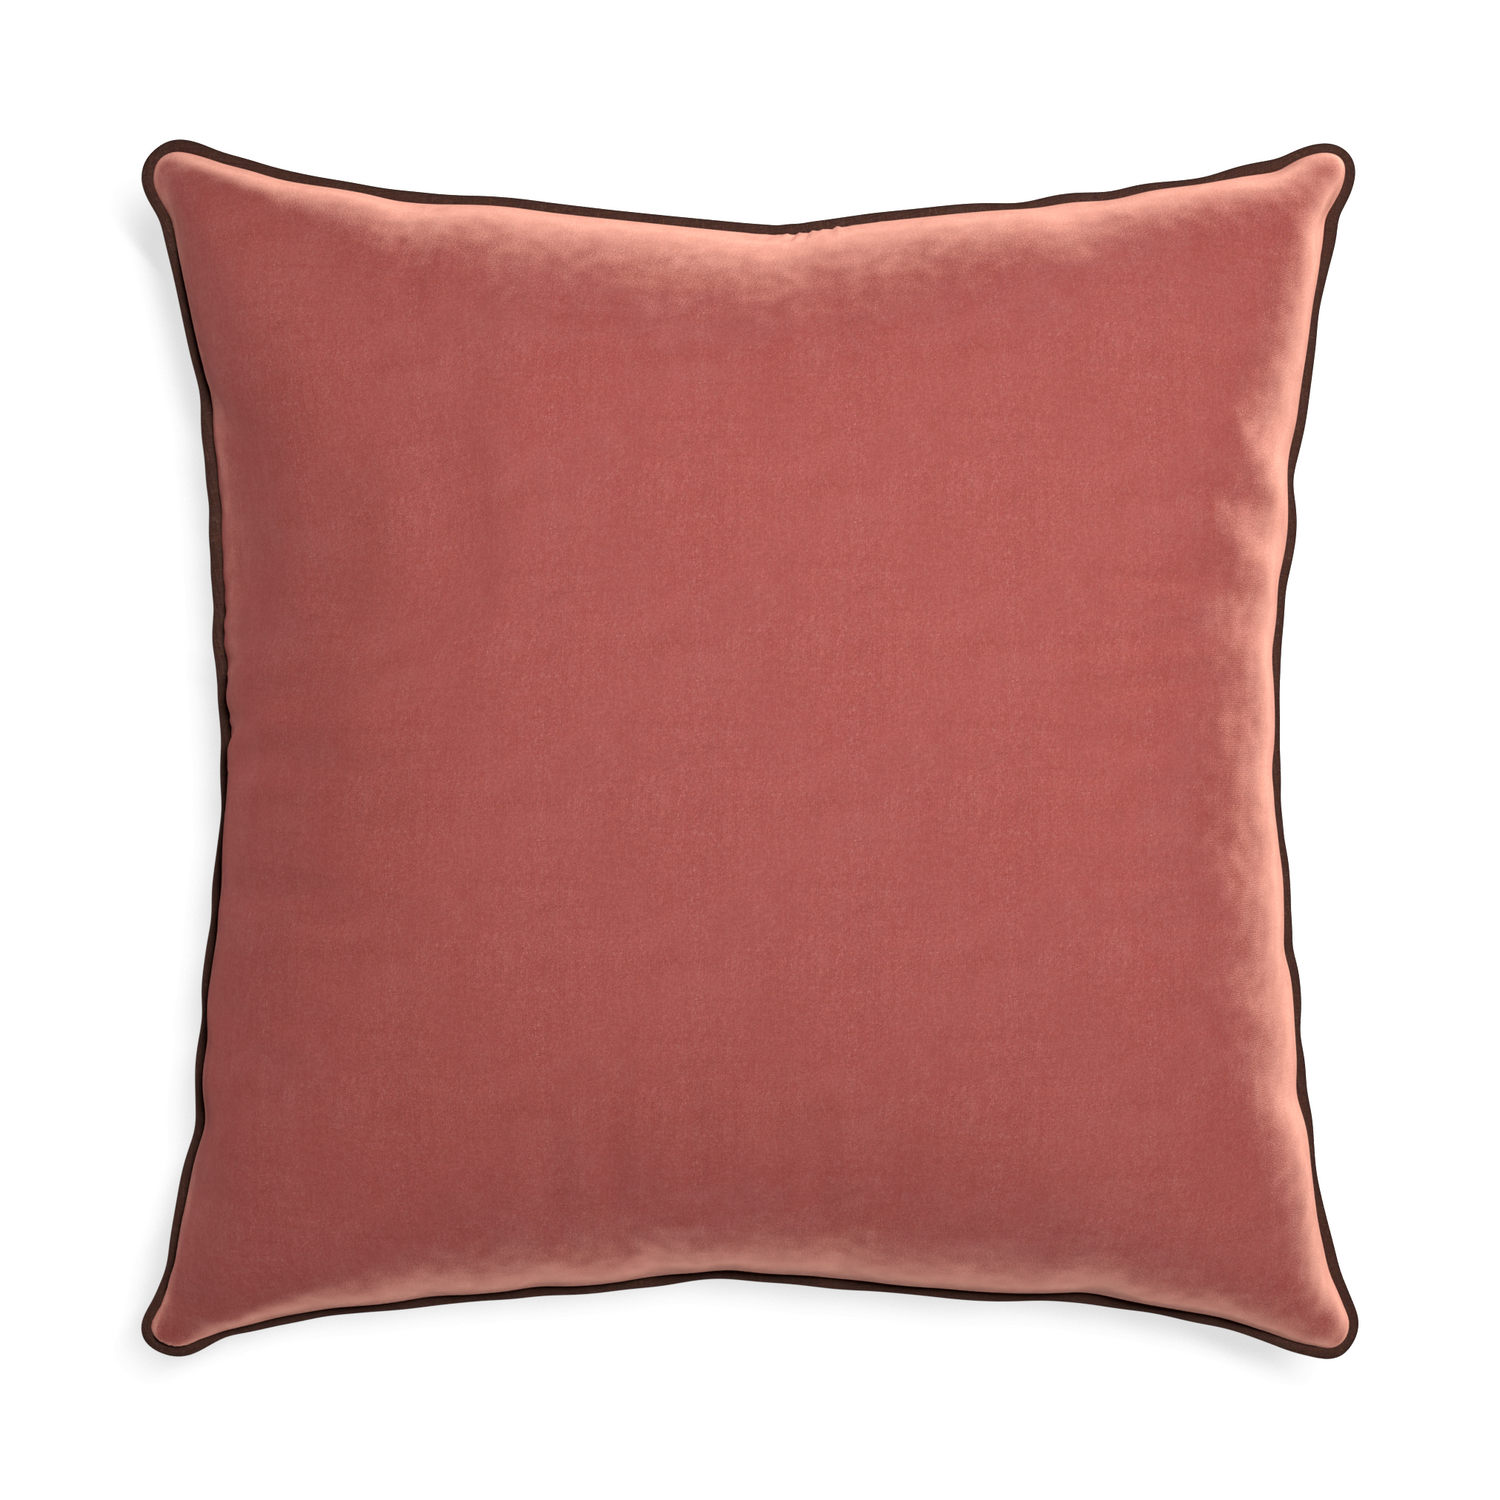 Euro-sham cosmo velvet custom pillow with w piping on white background